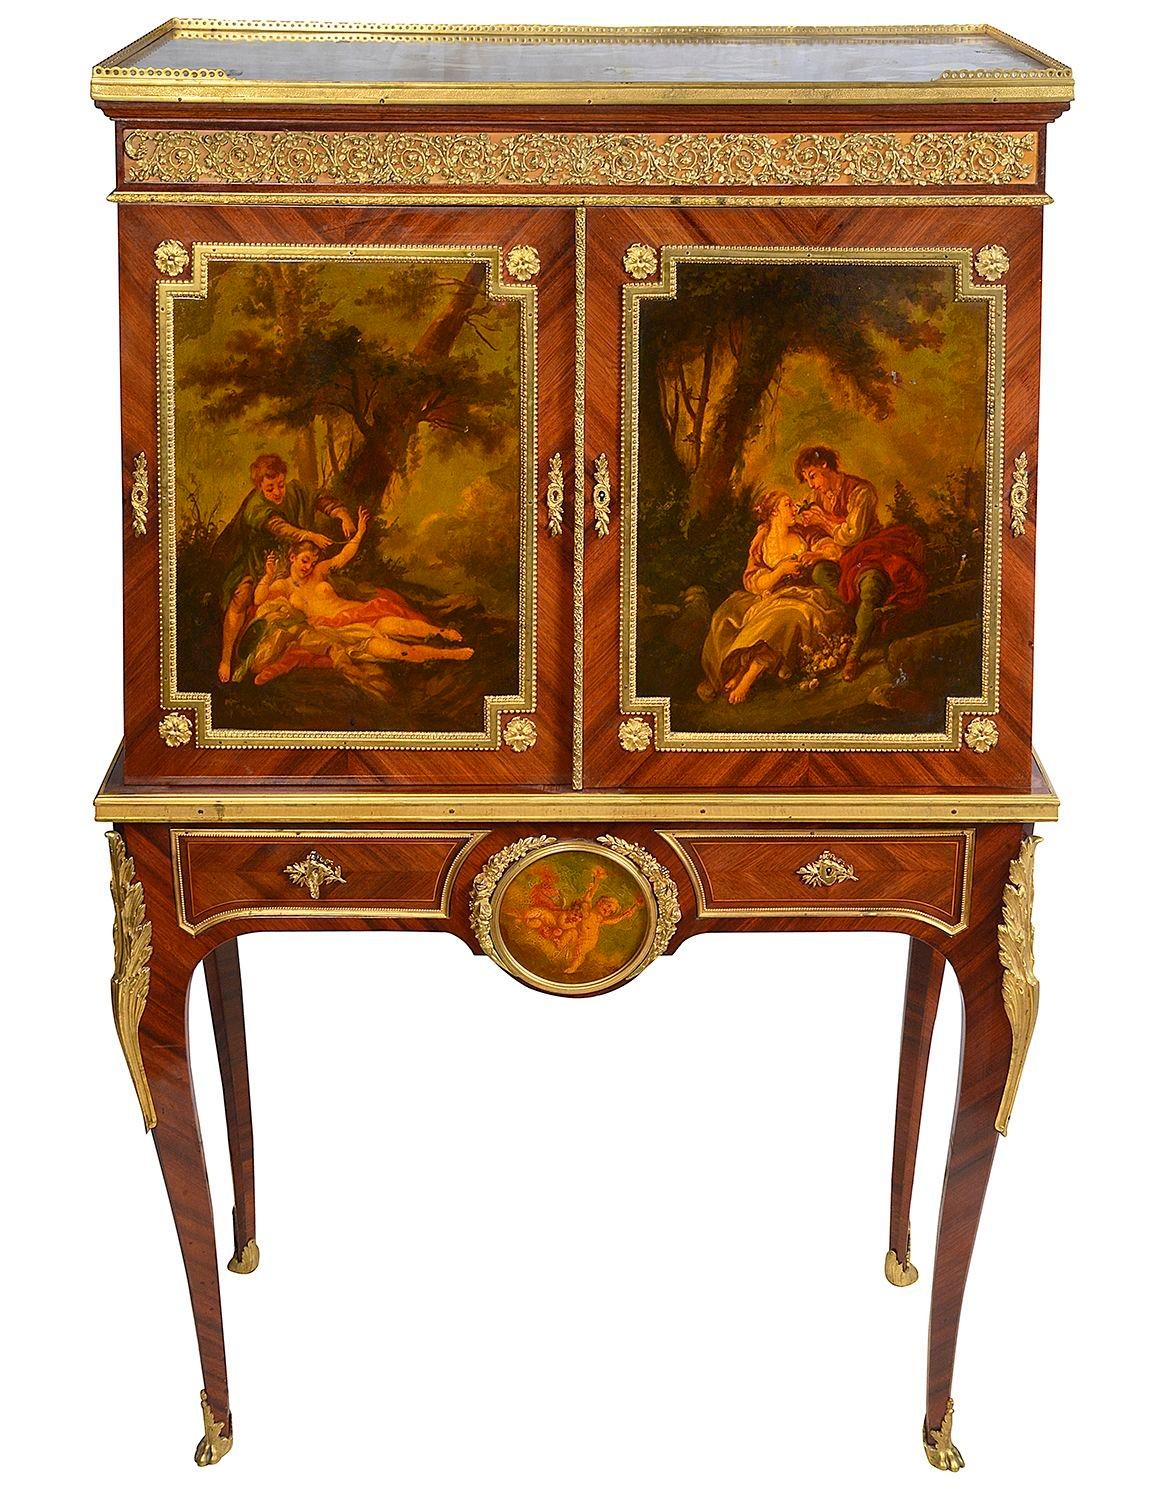 A fine quality late 19th Century French Kingwood, ormolu mounted side cabinet on stand, having the original marble top with a three quarter pierced brass gallery. A pair of wonderfully hand painted Verni Martin doors, depicting lovers. these open to